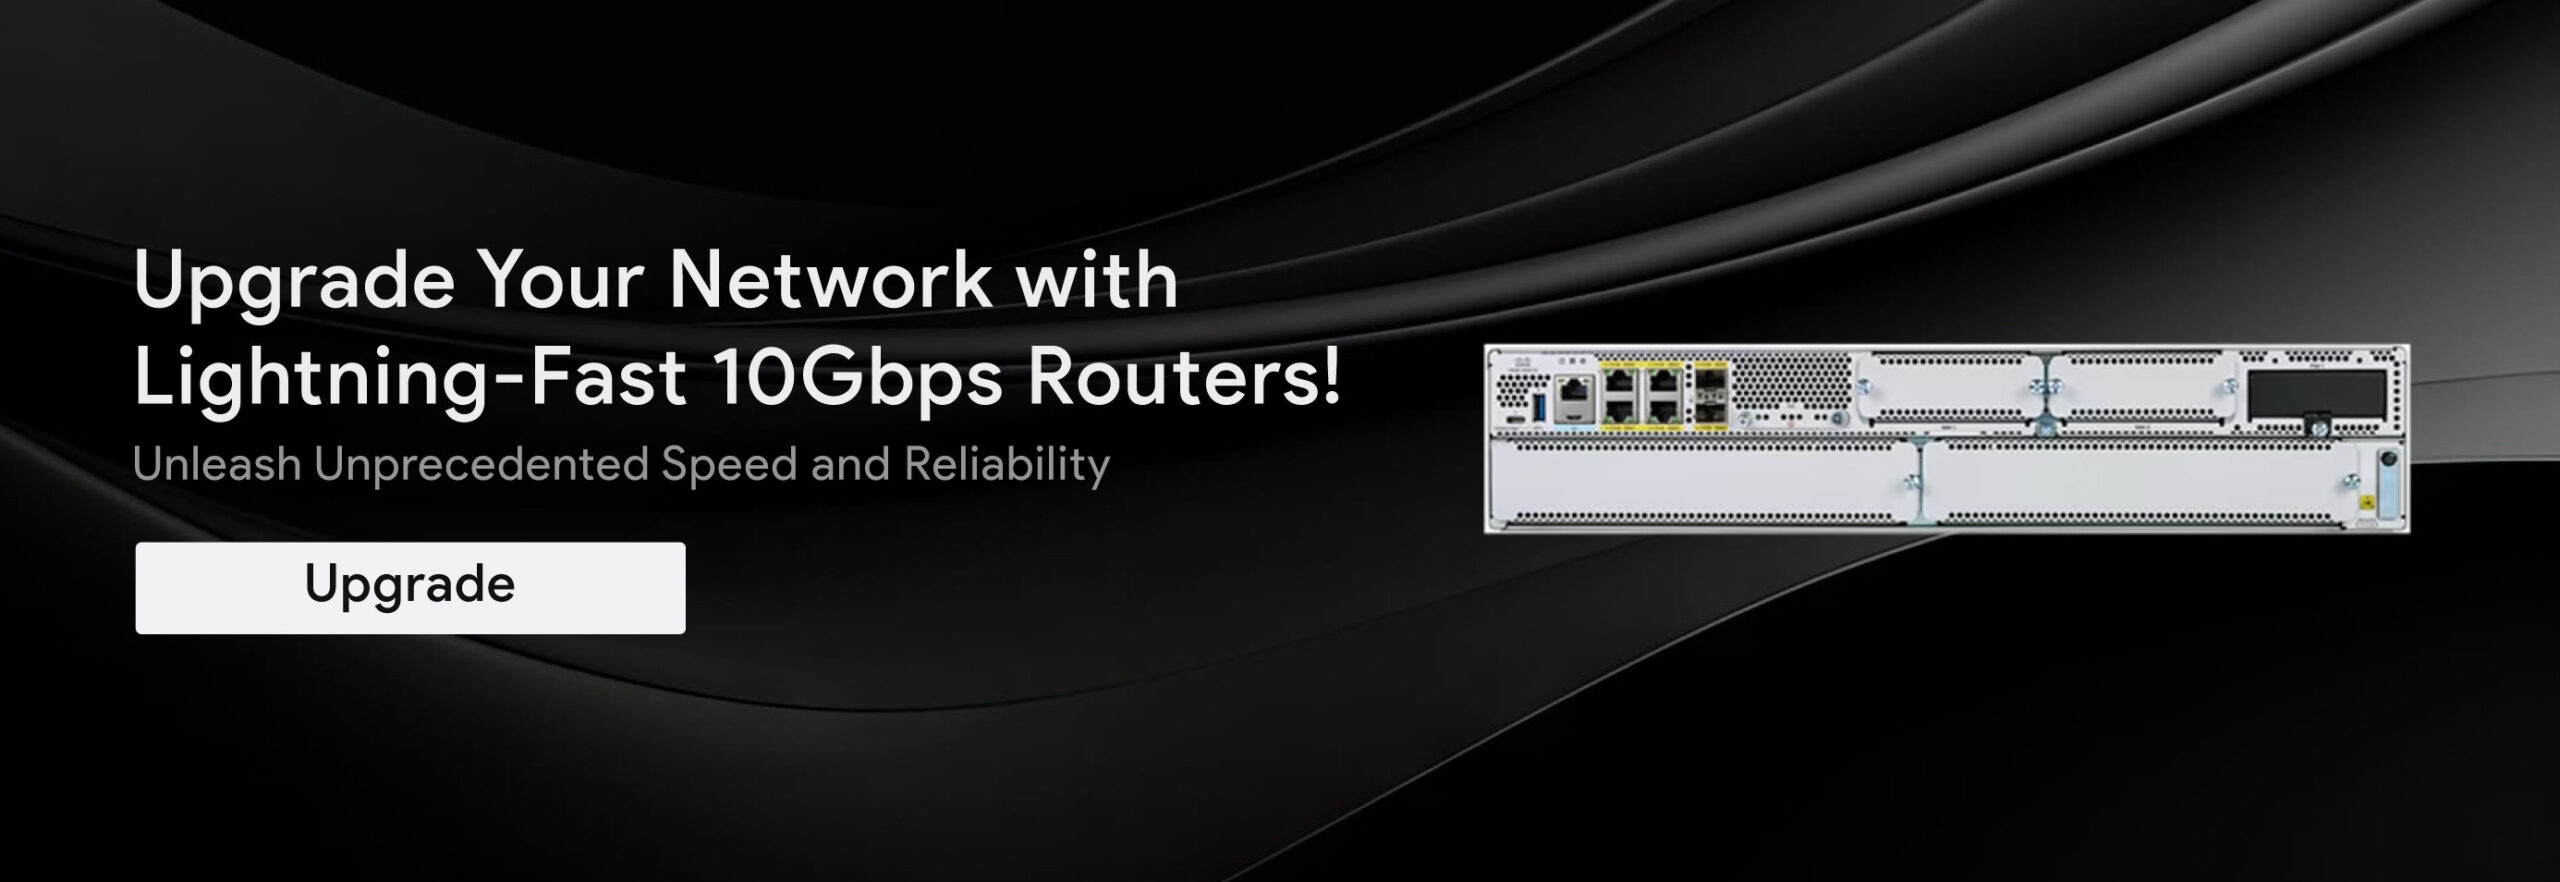 10Gbps-Routers